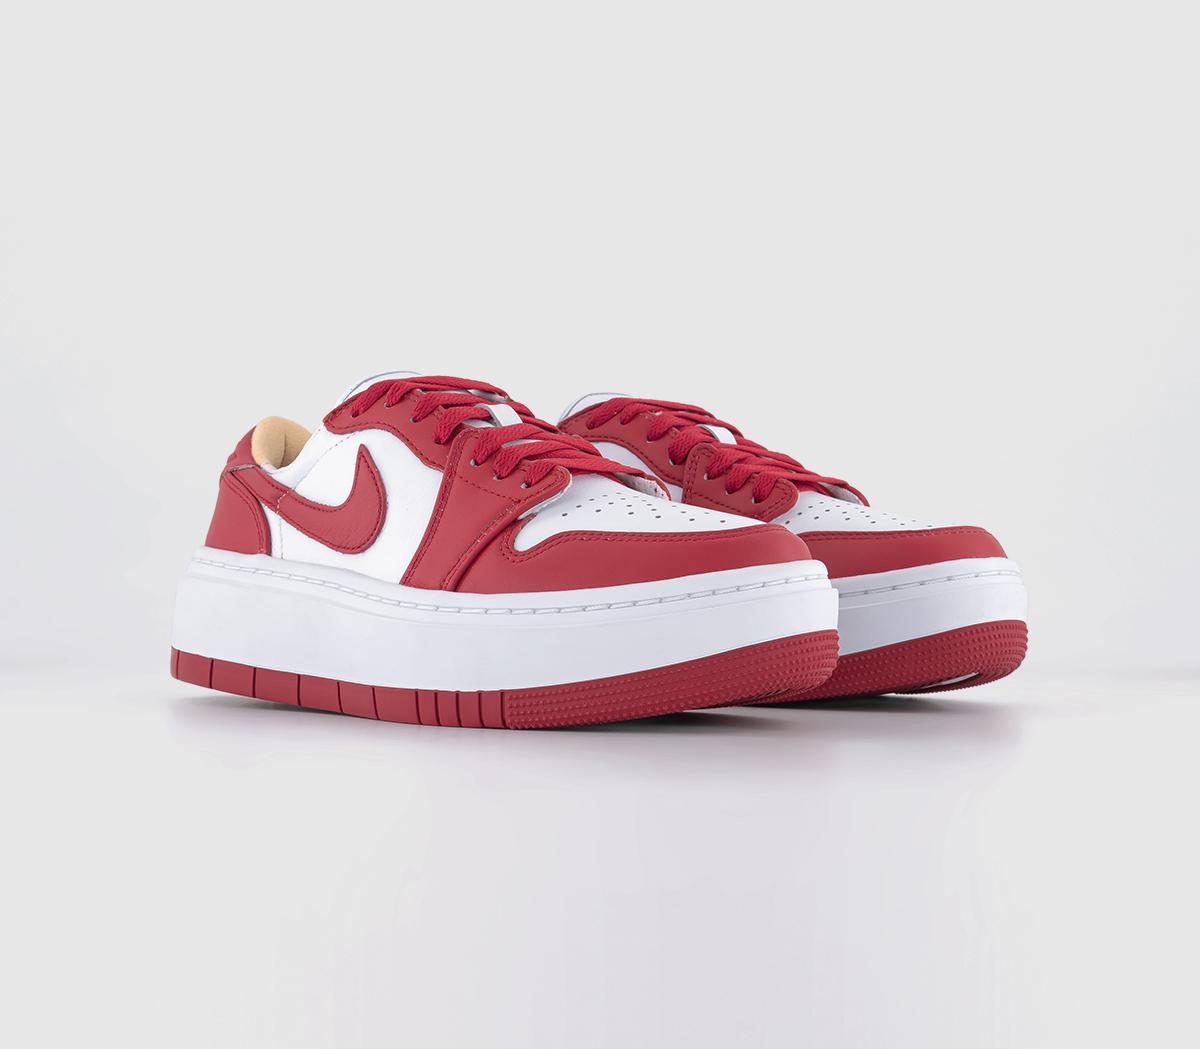 Jordan Womens Air 1 Elevate Low Trainers White Fire Red, 4.5